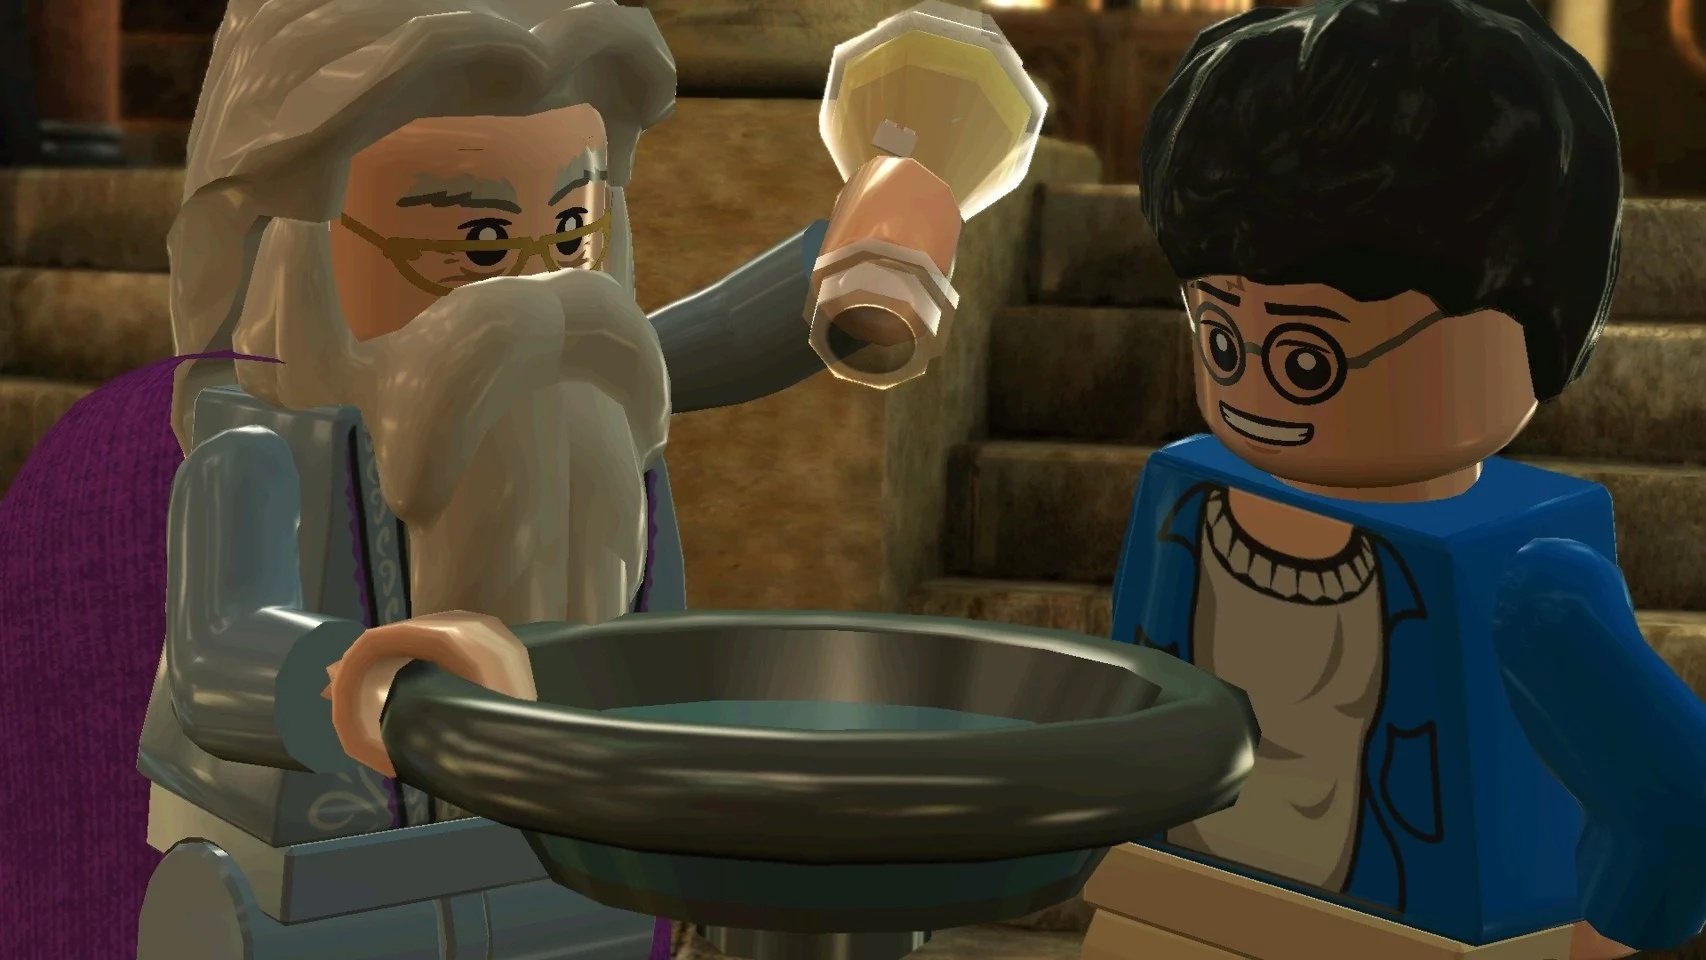 Best Lego Games: Lego Harry and Dumbledore with the Goblet of Fire